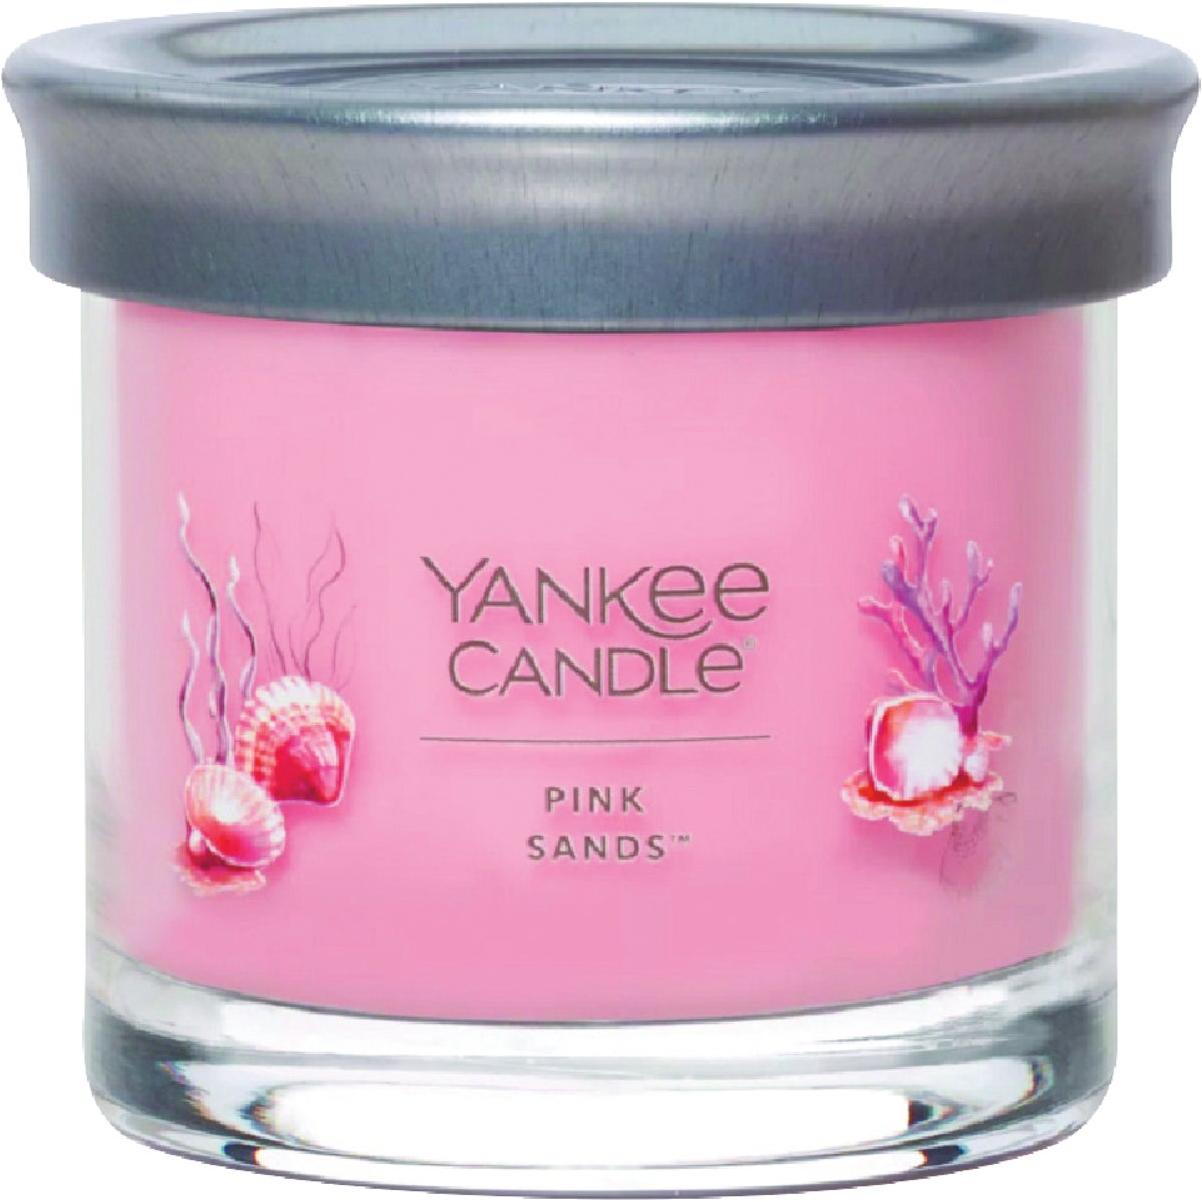 Yankee Candle 4.3 Oz. Pink Sands Tumbler Candle